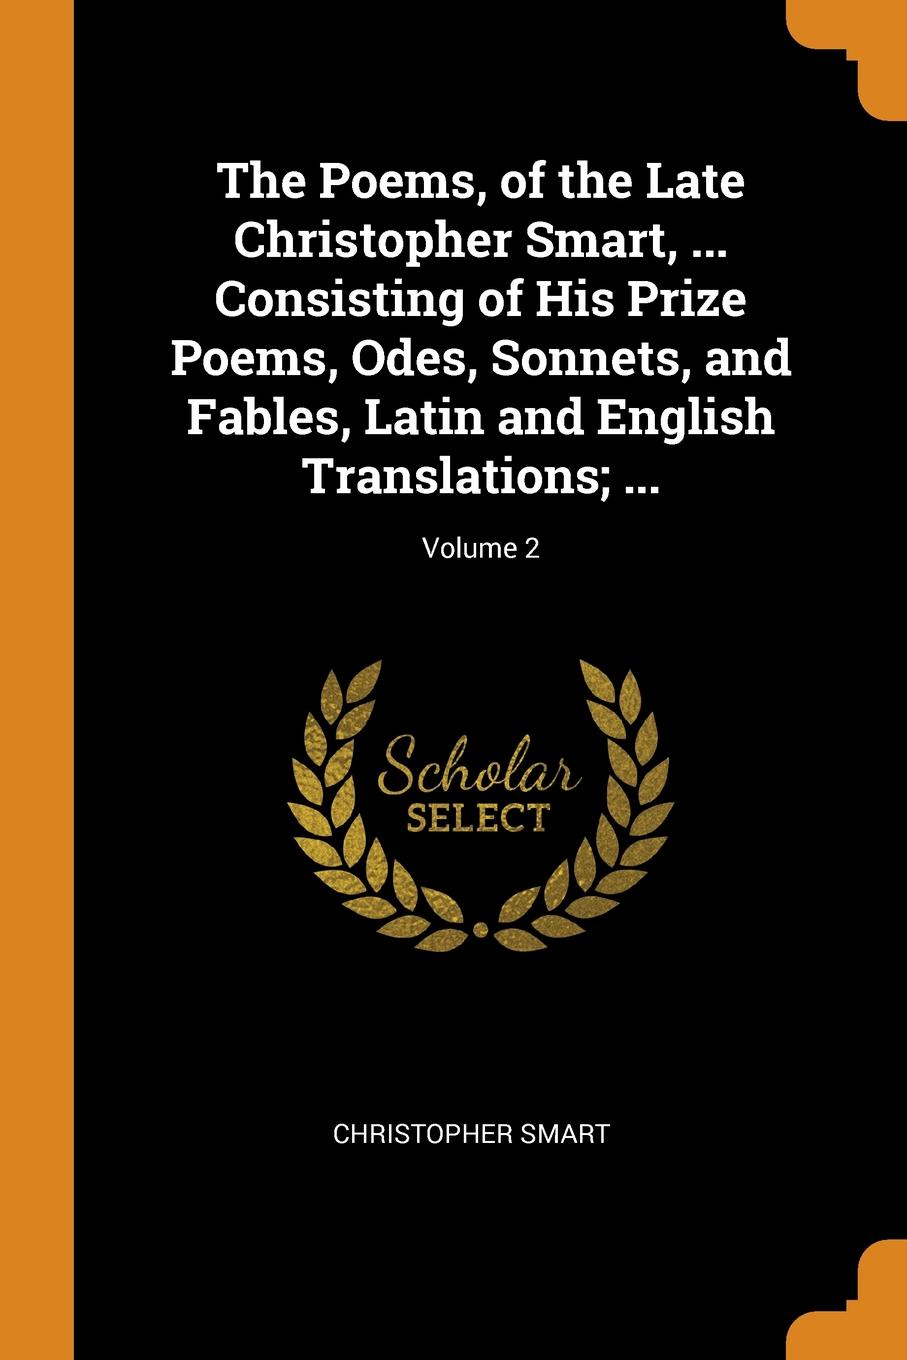 фото The Poems, of the Late Christopher Smart, ... Consisting of His Prize Poems, Odes, Sonnets, and Fables, Latin and English Translations; ...; Volume 2